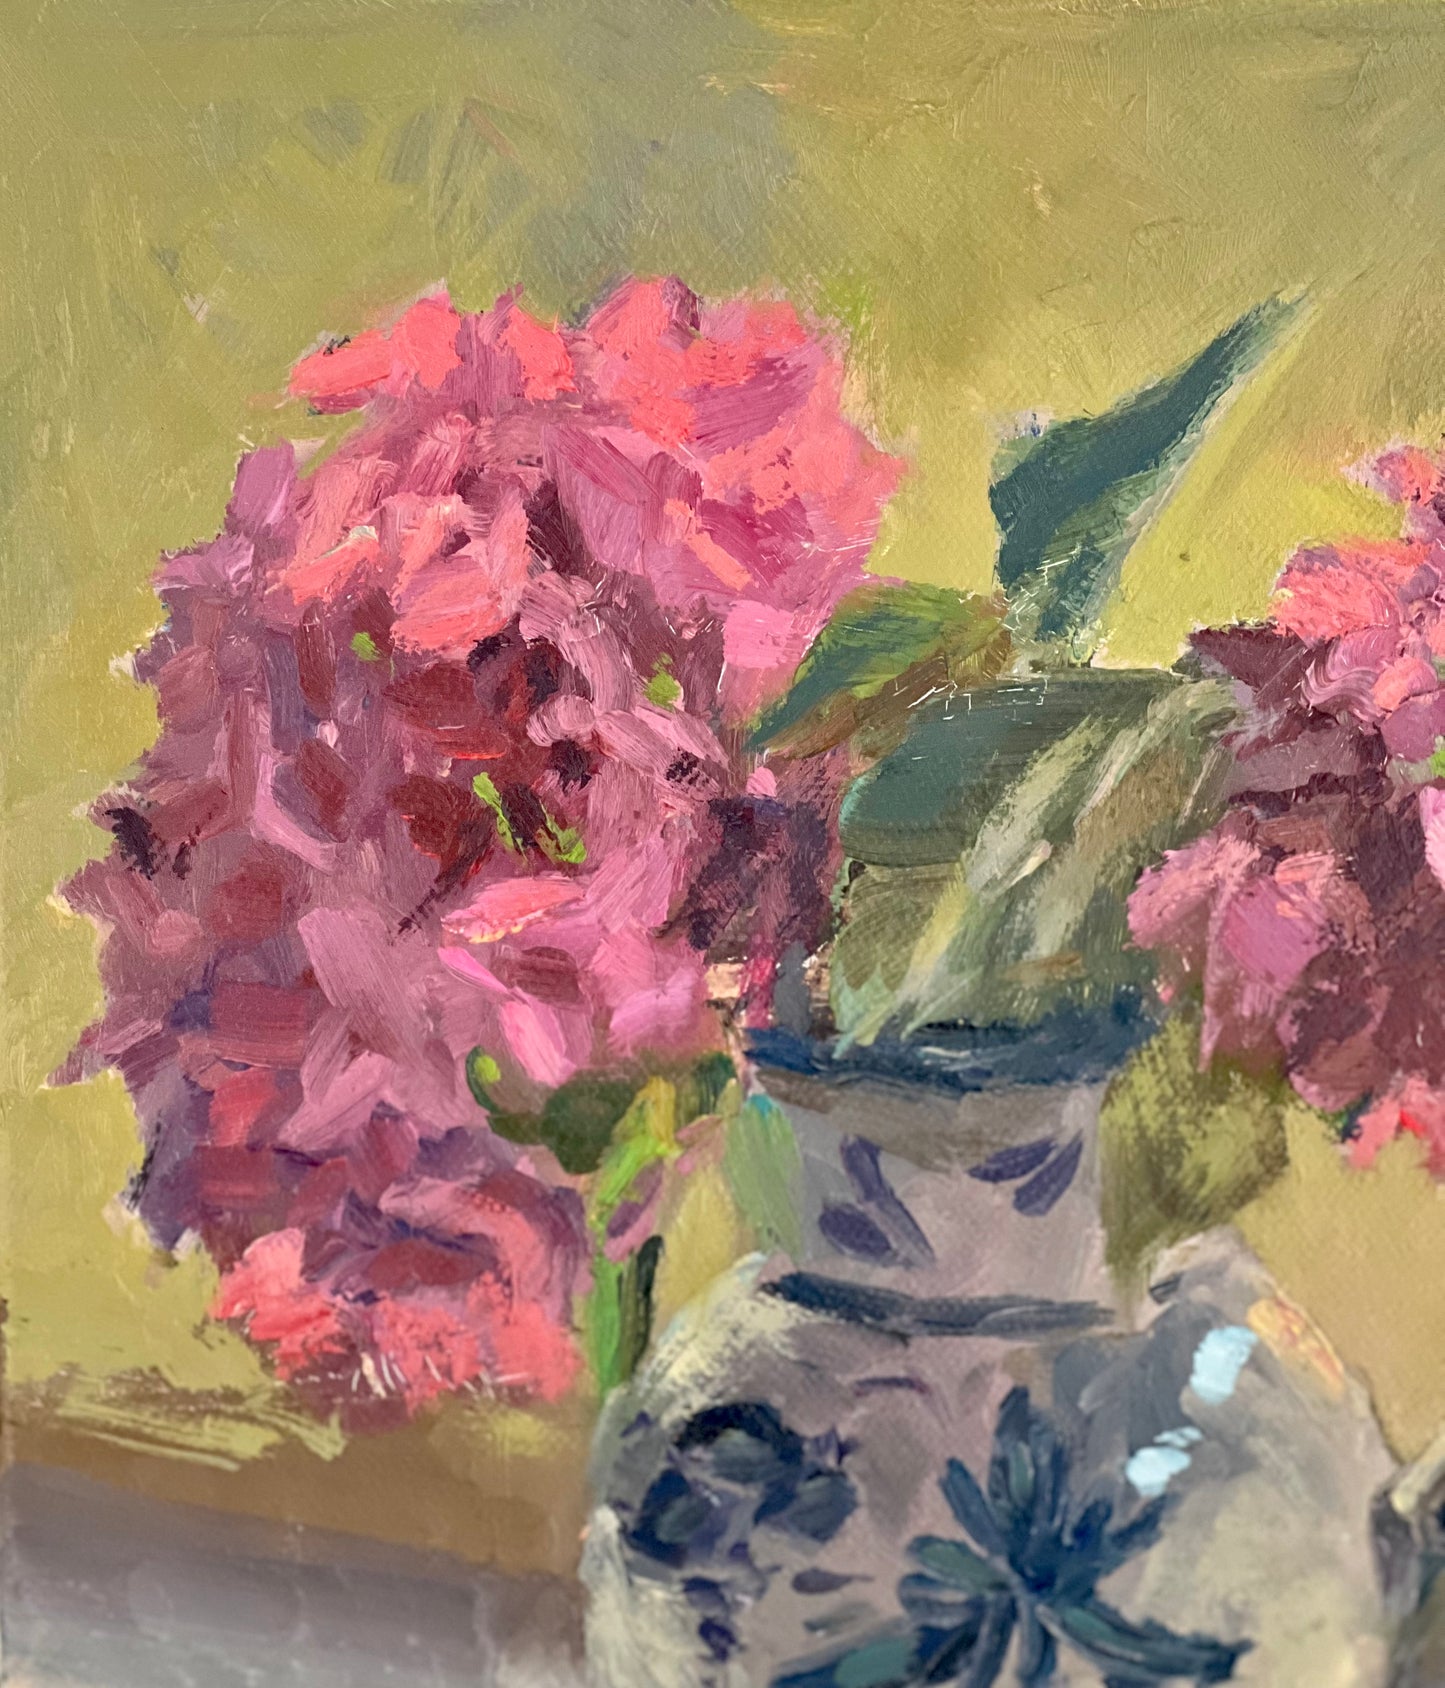 Floral oil painting - Hydrangeas from my garden!